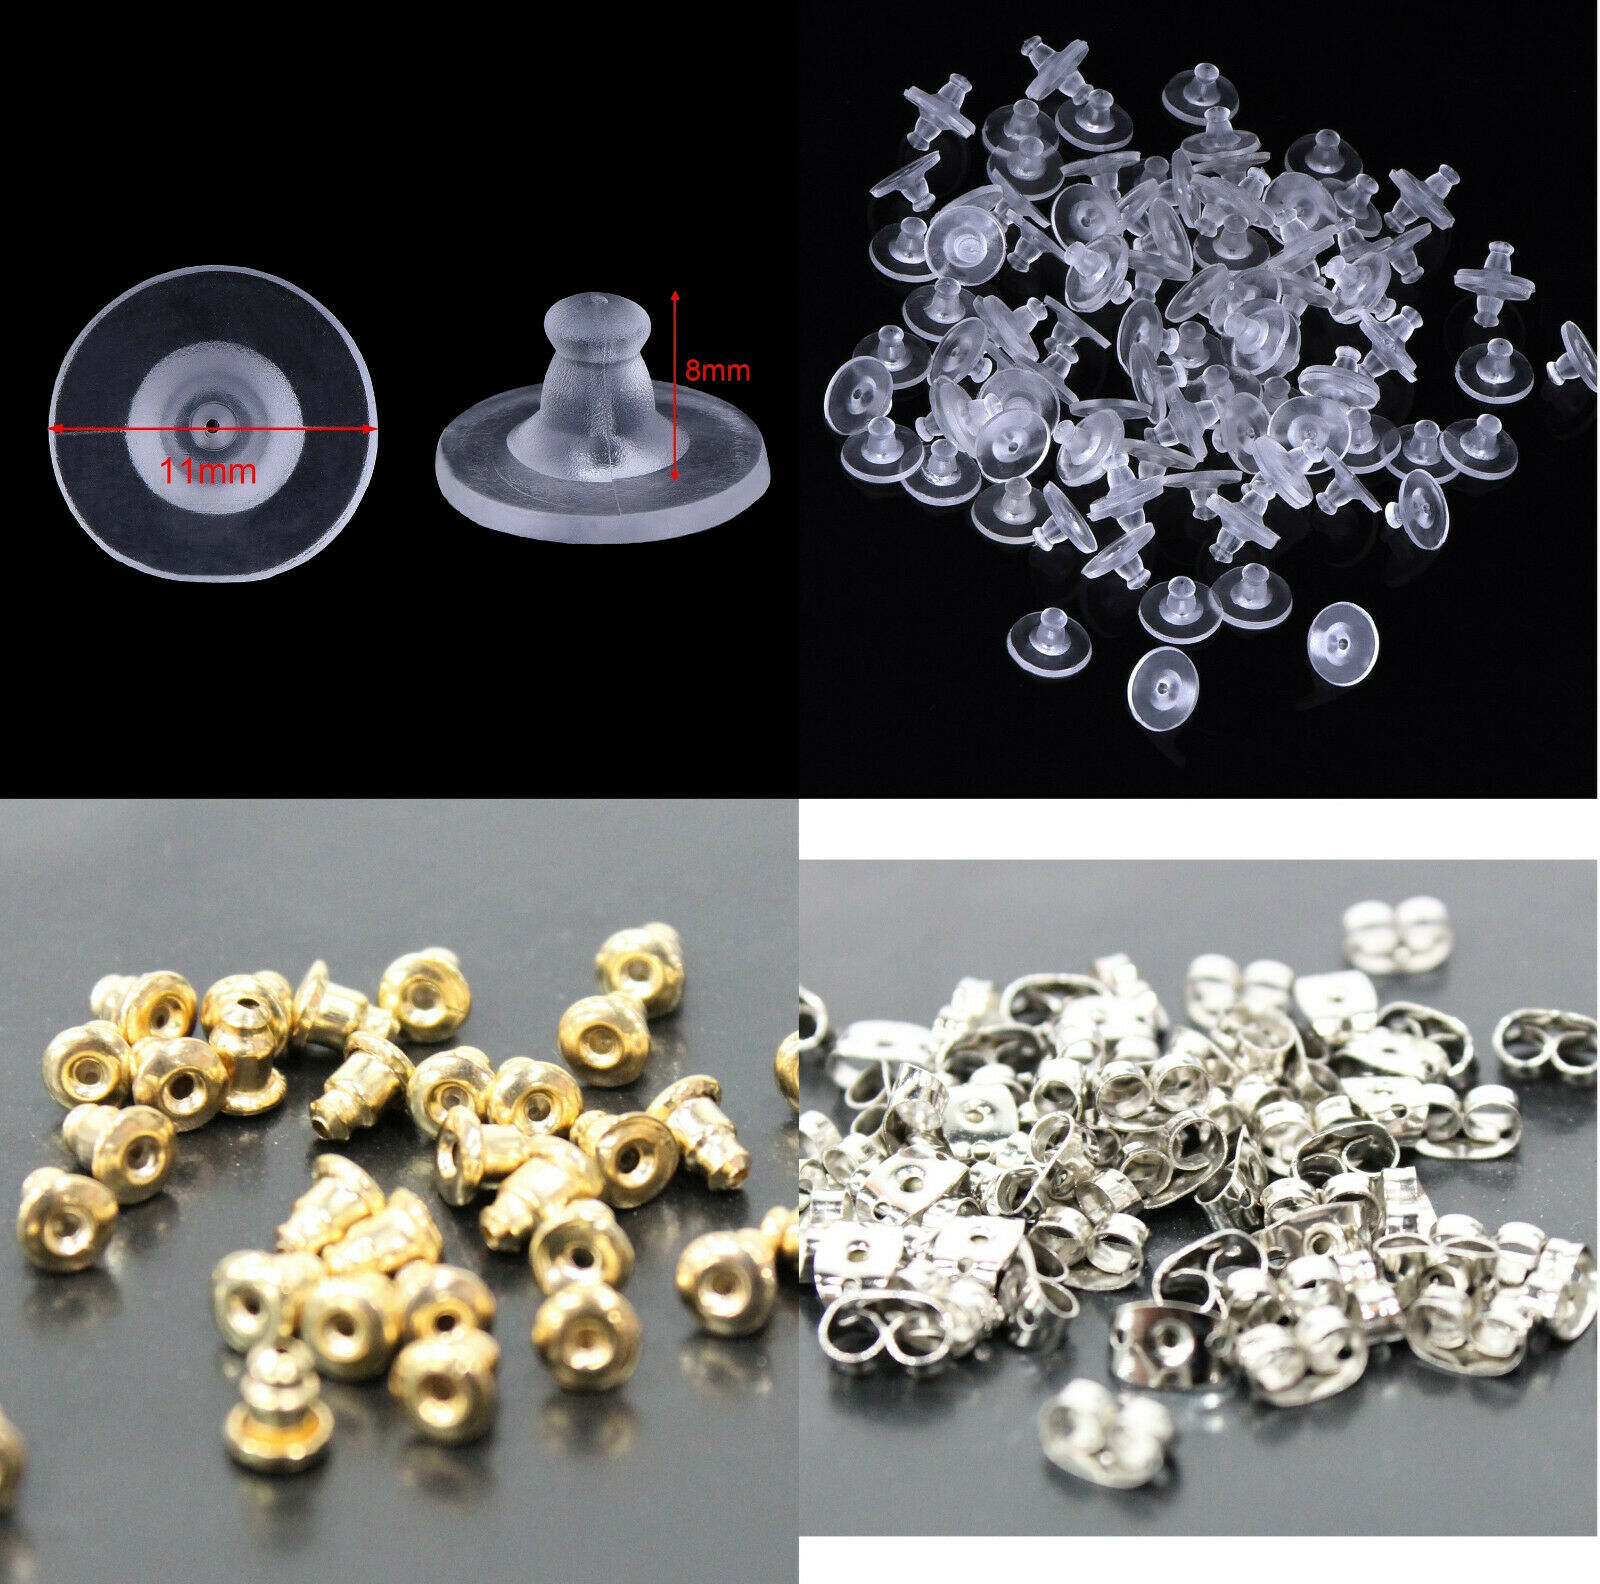 Earring Backs Clutch Push Back Stoppers Earring Backs In Metal Or Silicone